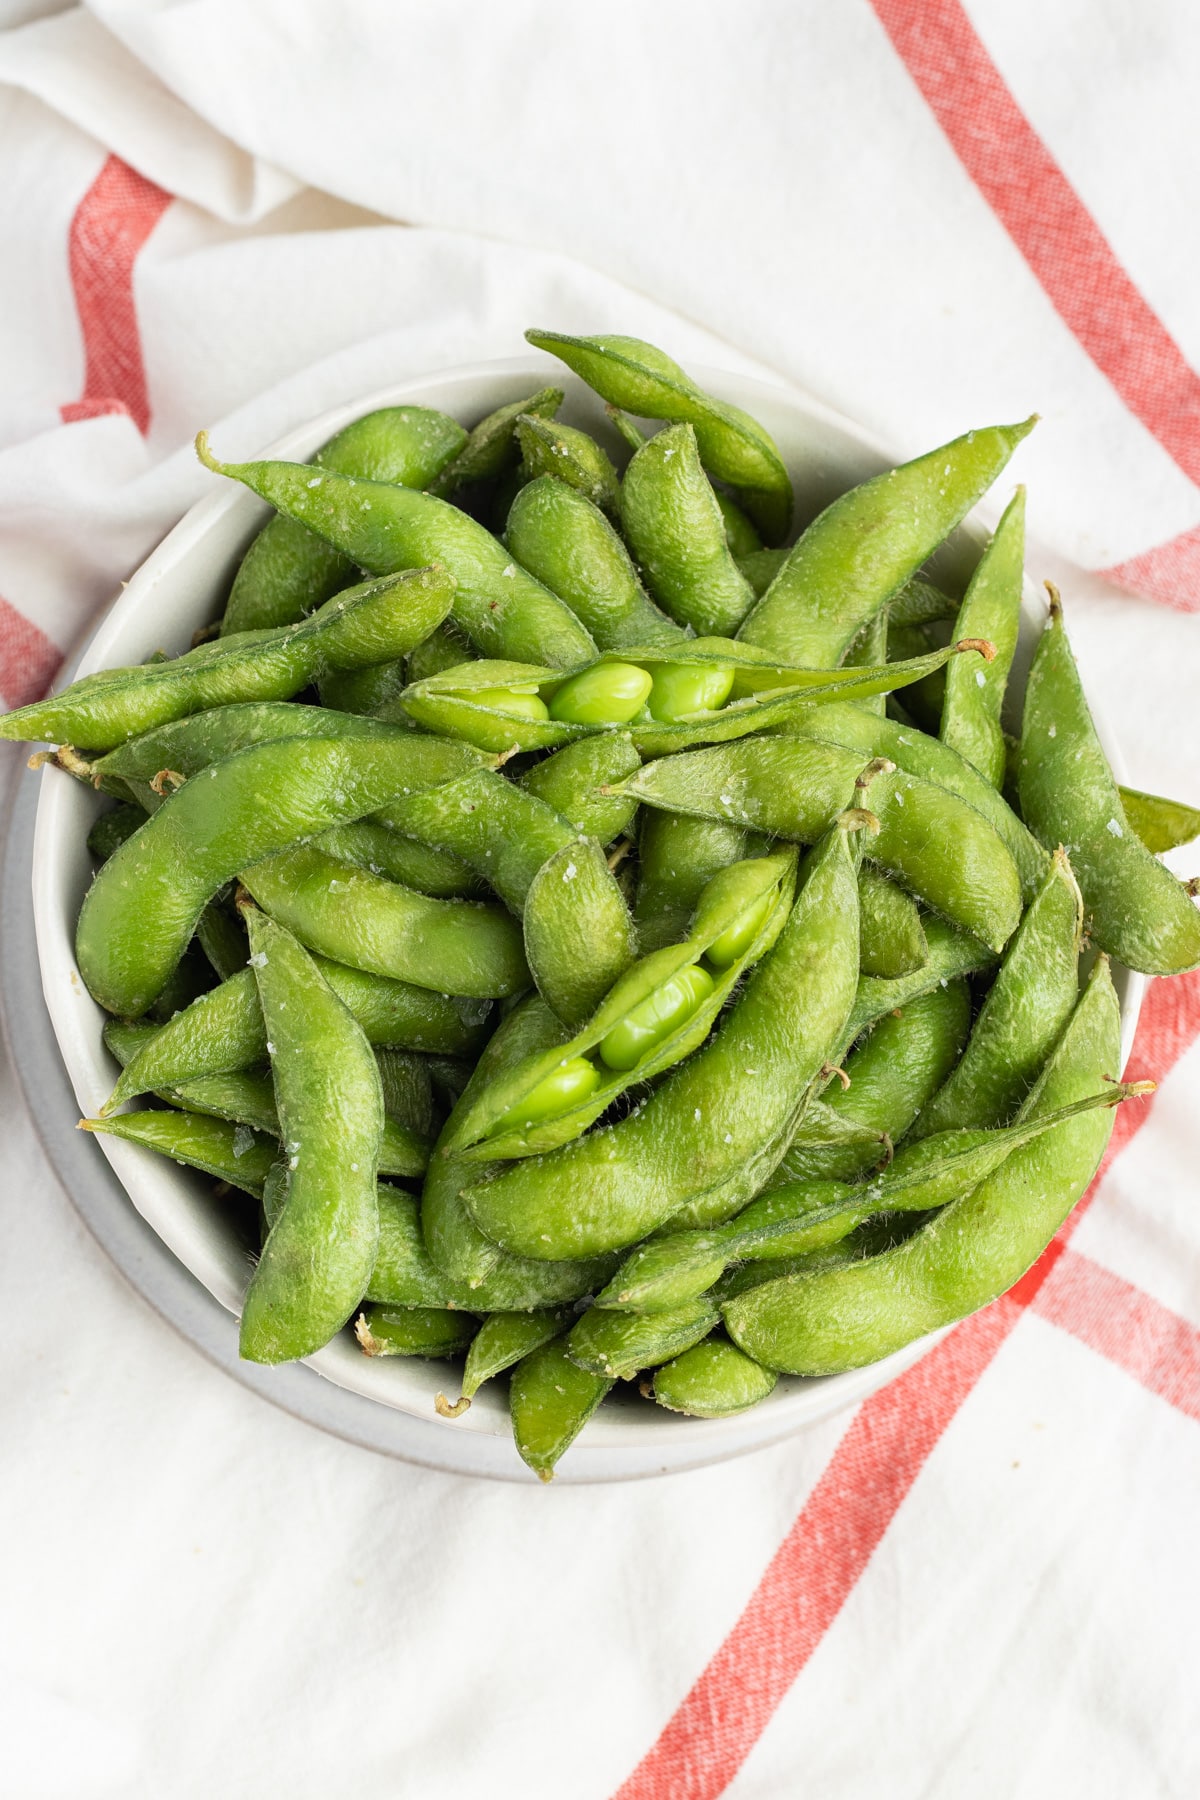 This is a picture of a bowl filled with edamame.